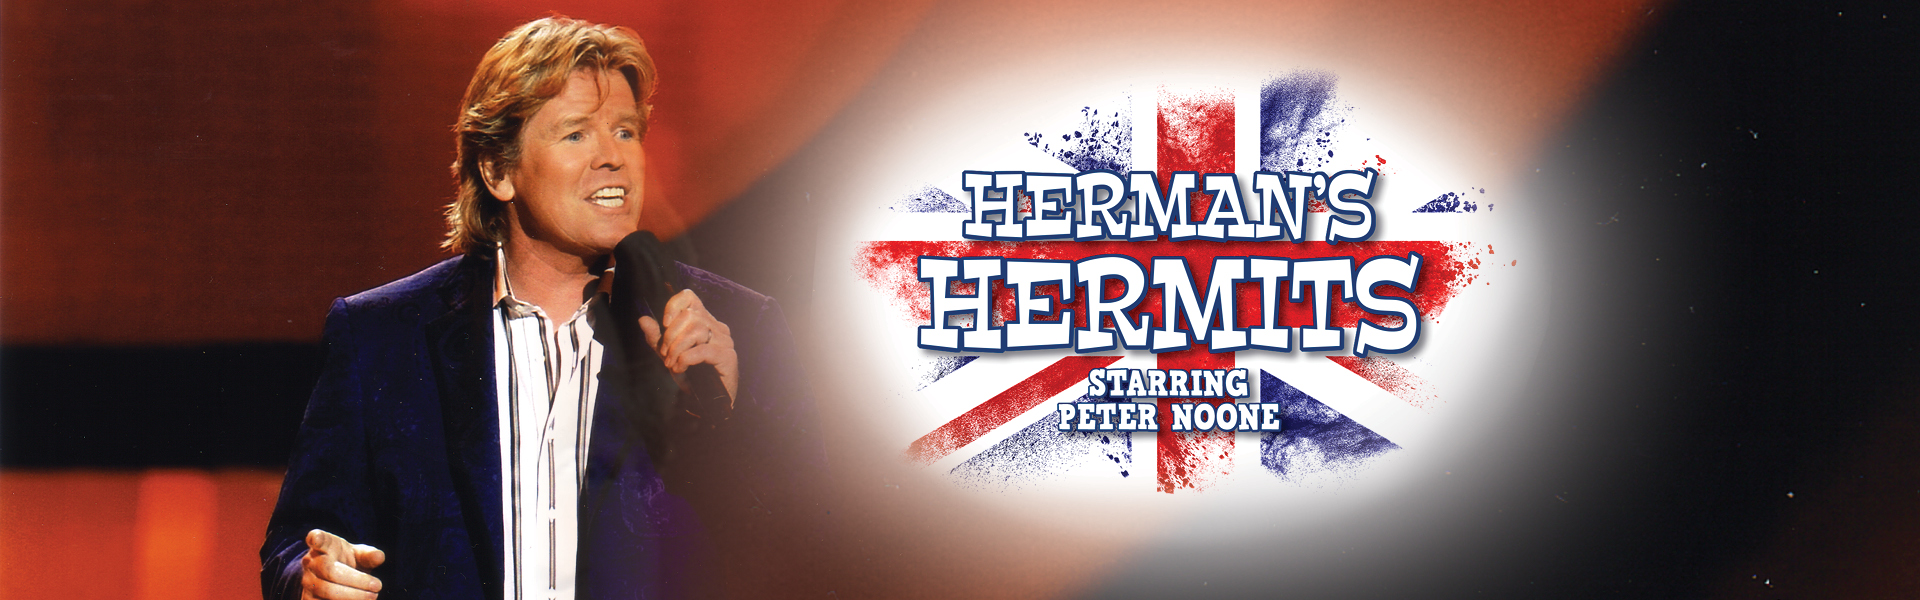 Picture of Hermans Hermits - starring Peter Noone